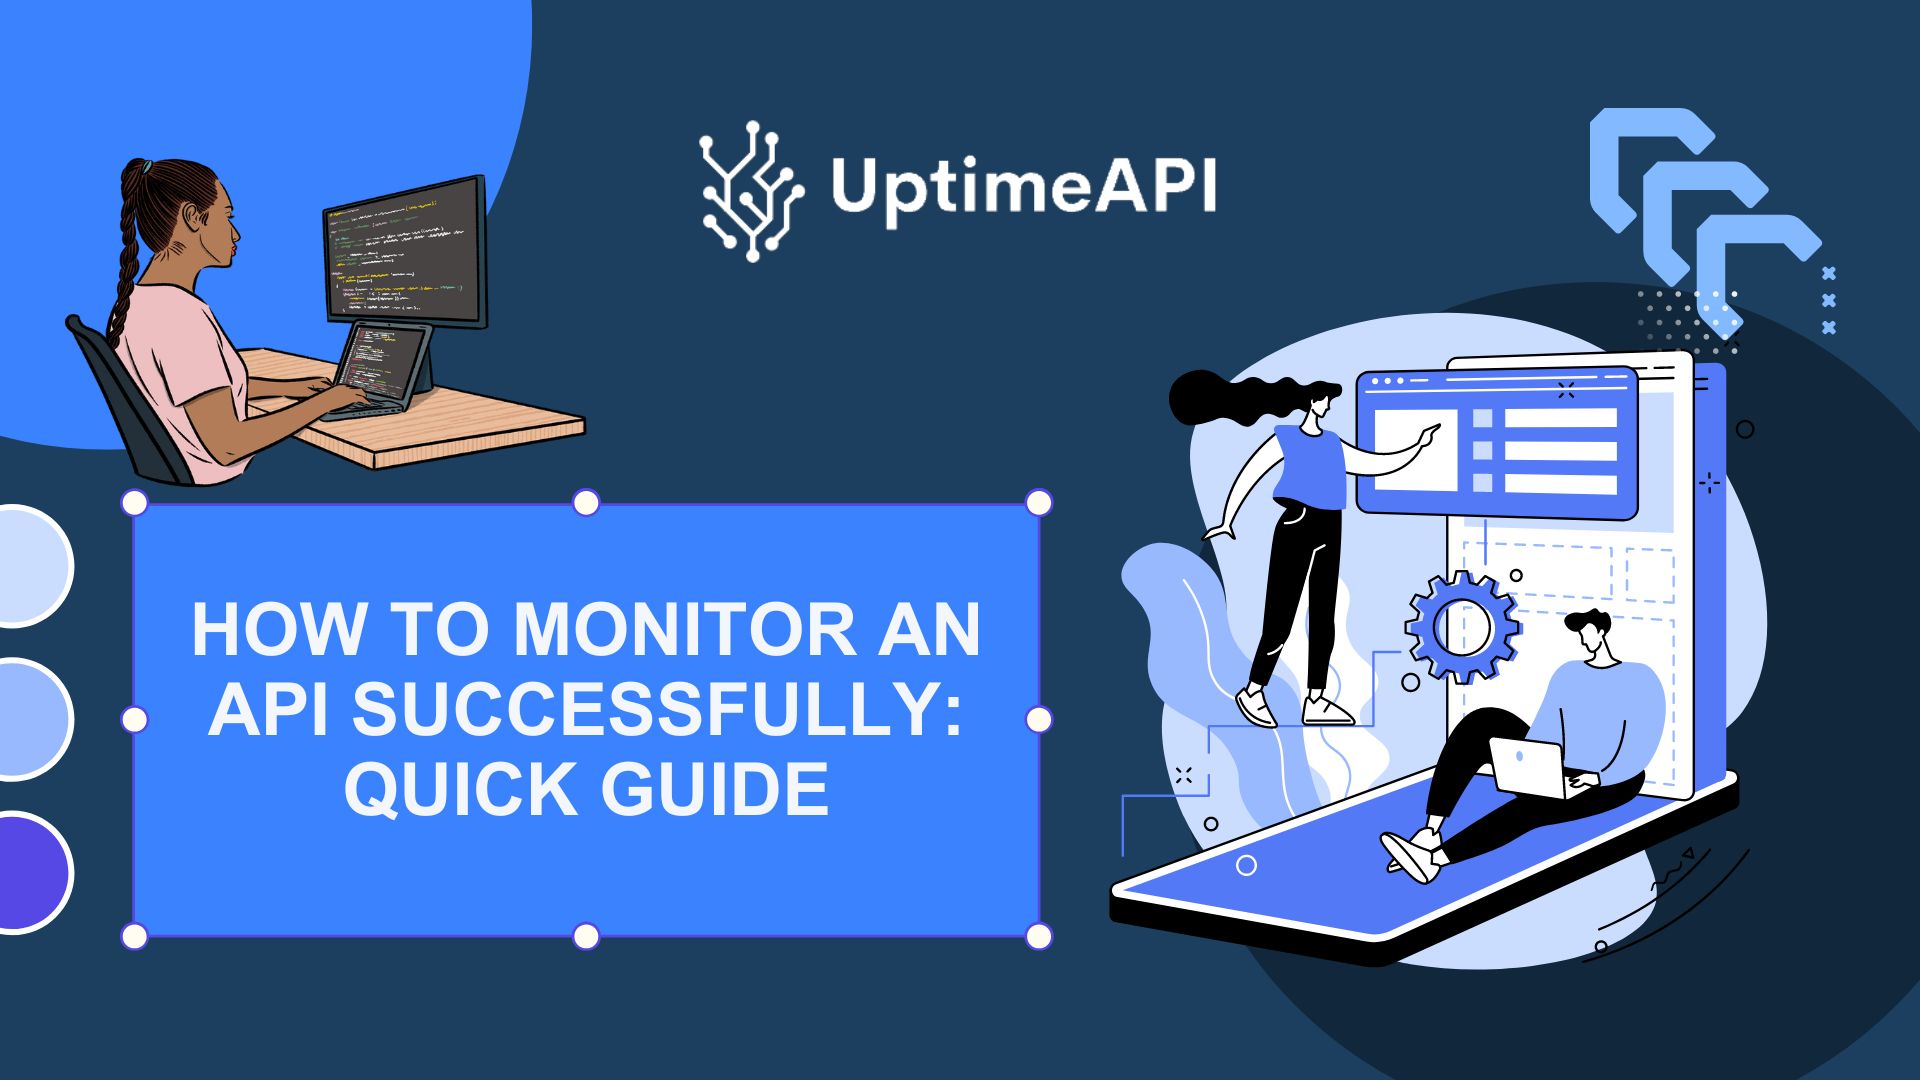 How To Monitor An API Successfully: Quick Guide